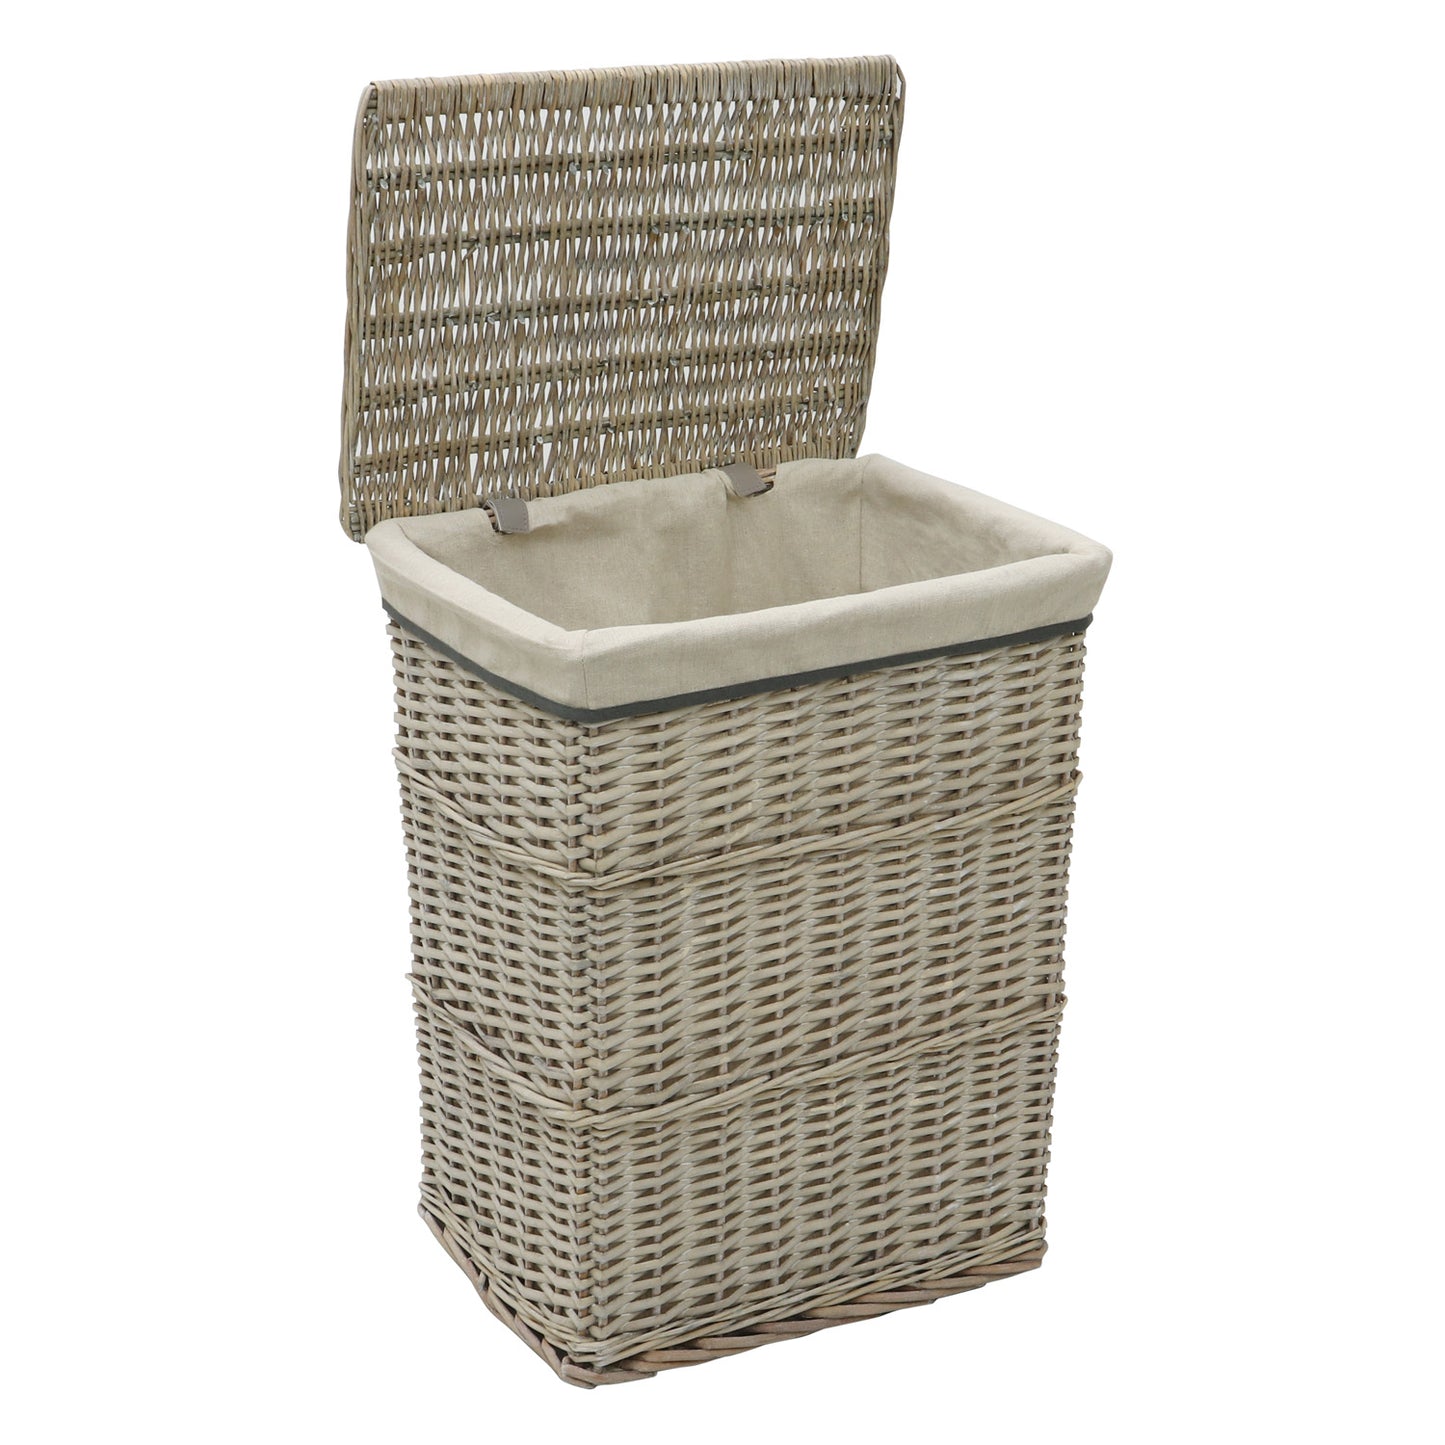 Arianna Antique Wash Rectangle Willow Laundry Baskets and Bins Set